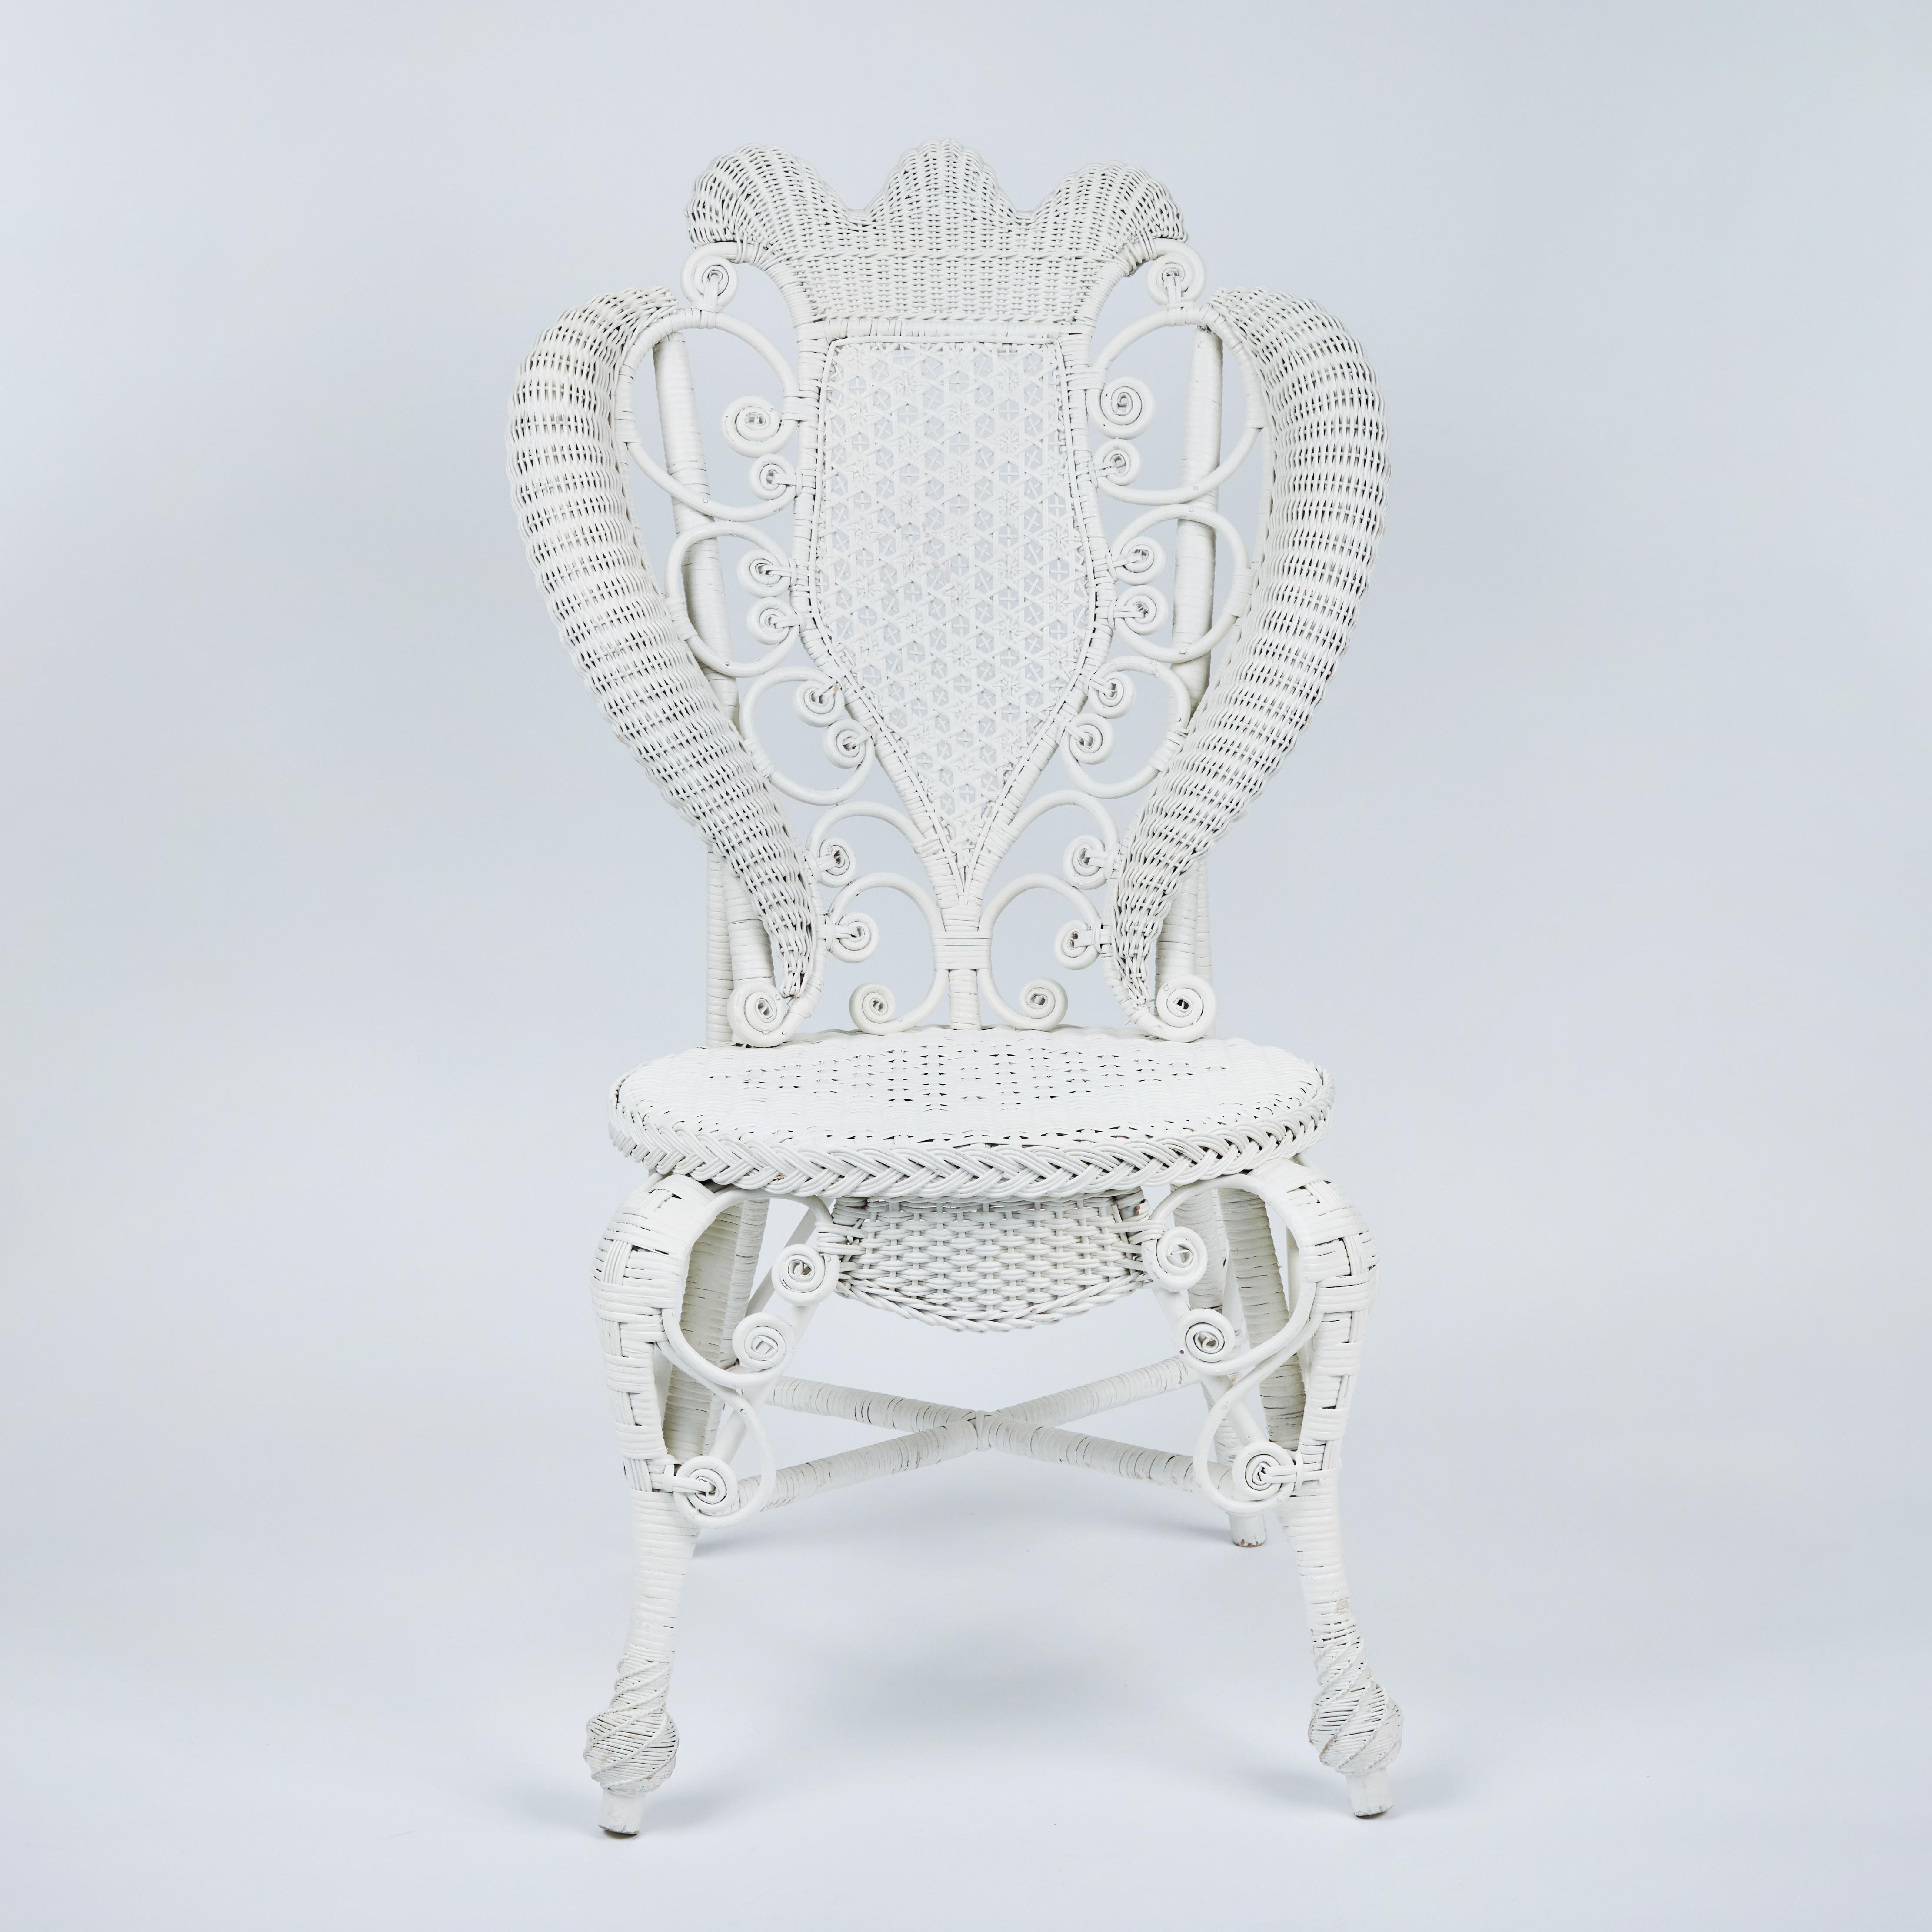 This special antique Victorian white wicker chair is possibly from the end of the 19th century. It has an elaborate designed panel through the back and is accented with curlicues throughout. This overall decorative design is very shapely and sensual